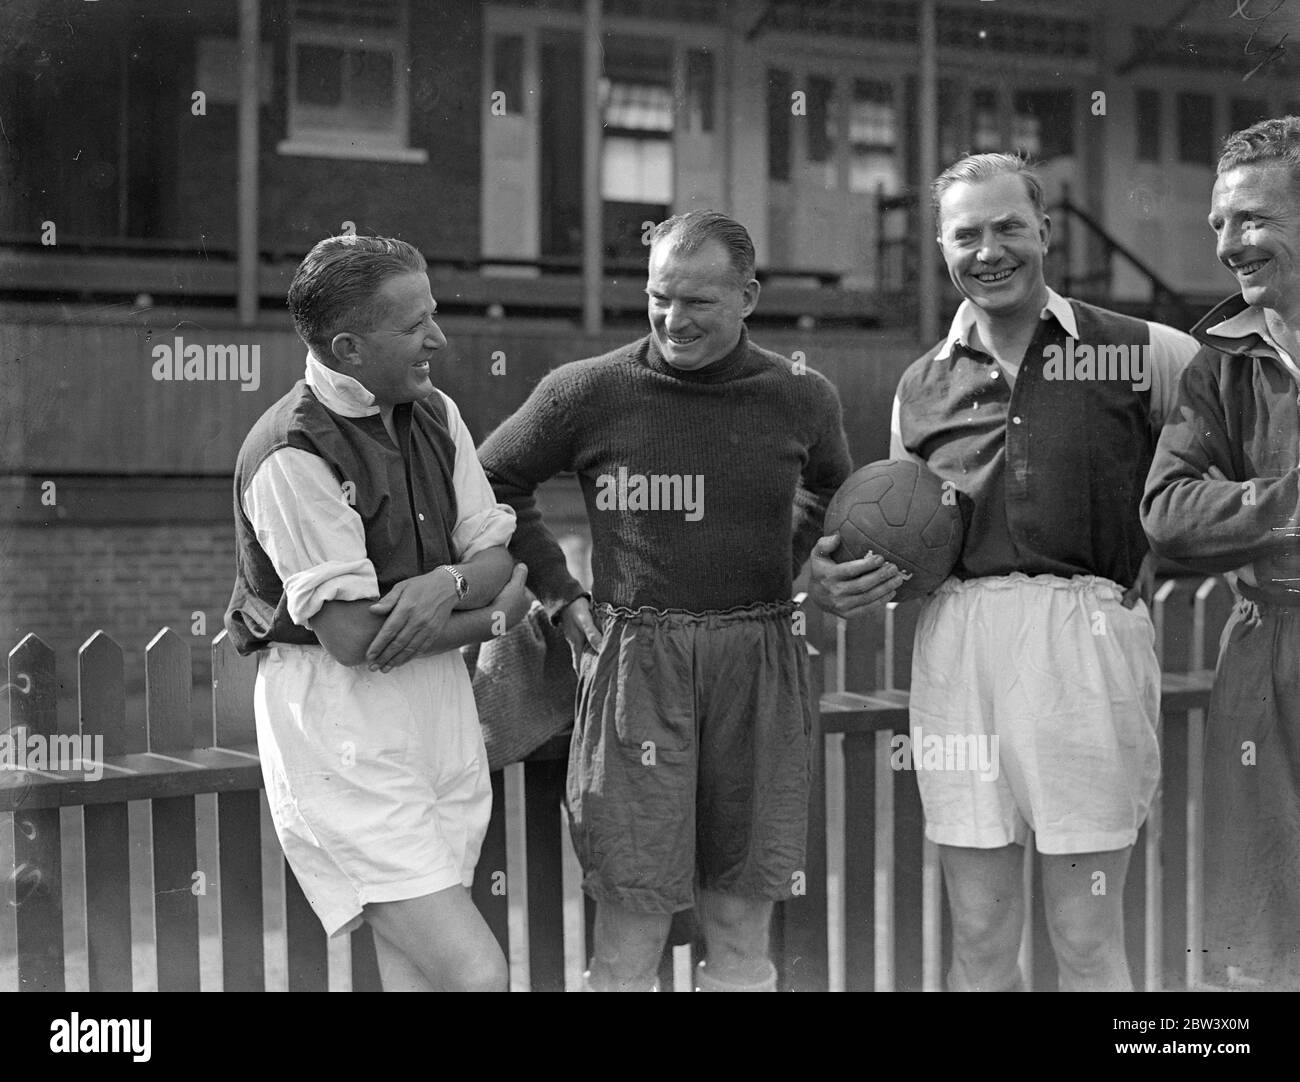 Tommy Rose and Charles Scott , the airmen , reported for duty to Tom Whittaker , the Arsenal Football trainer at the Arsenal training ground , Tufnell Park , to be made fighting fit for next month ' s England , Johannesburg air race . The airmen are going into training with the Arsenal footballers . Photo shows , Tommy Rose ( left ) and Charles Scott withTom Whittaker at the Tufnell Park ground . 27 August 1936 . Original caption from negative Stock Photo